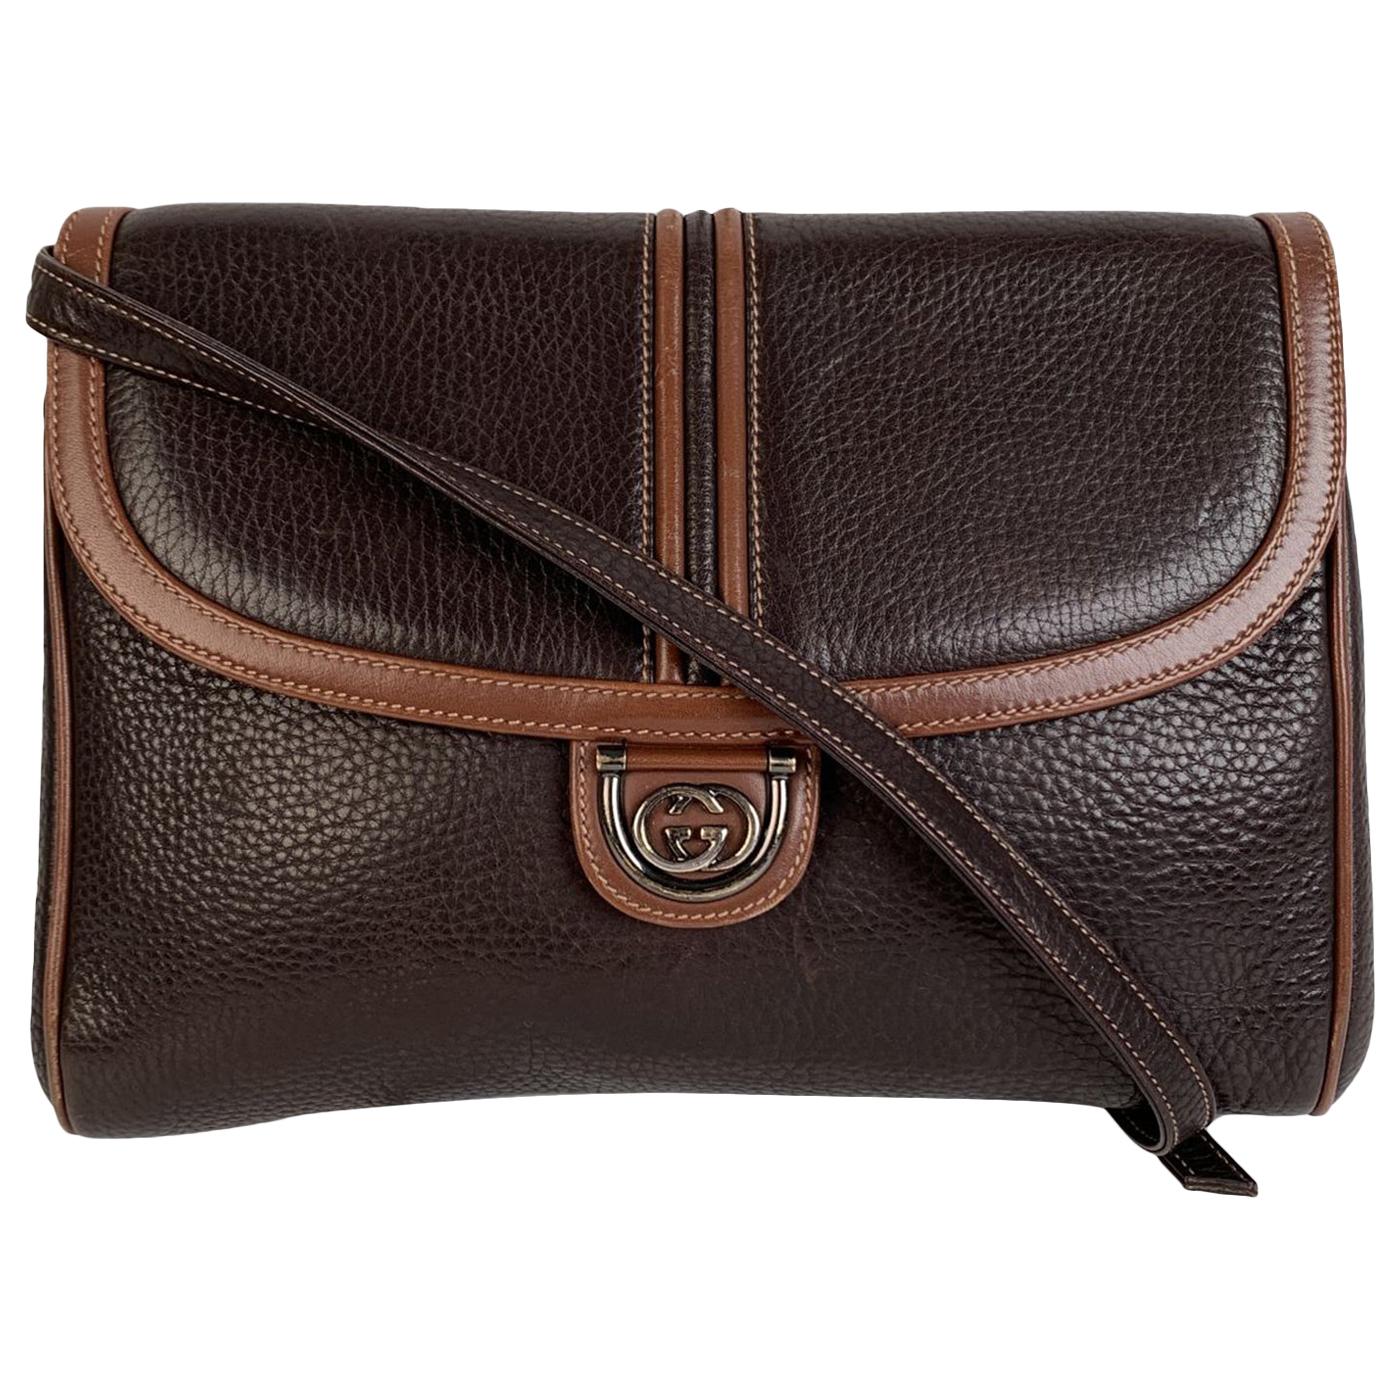 Gucci Vintage Brown Leather Convertible Crossbody Bag